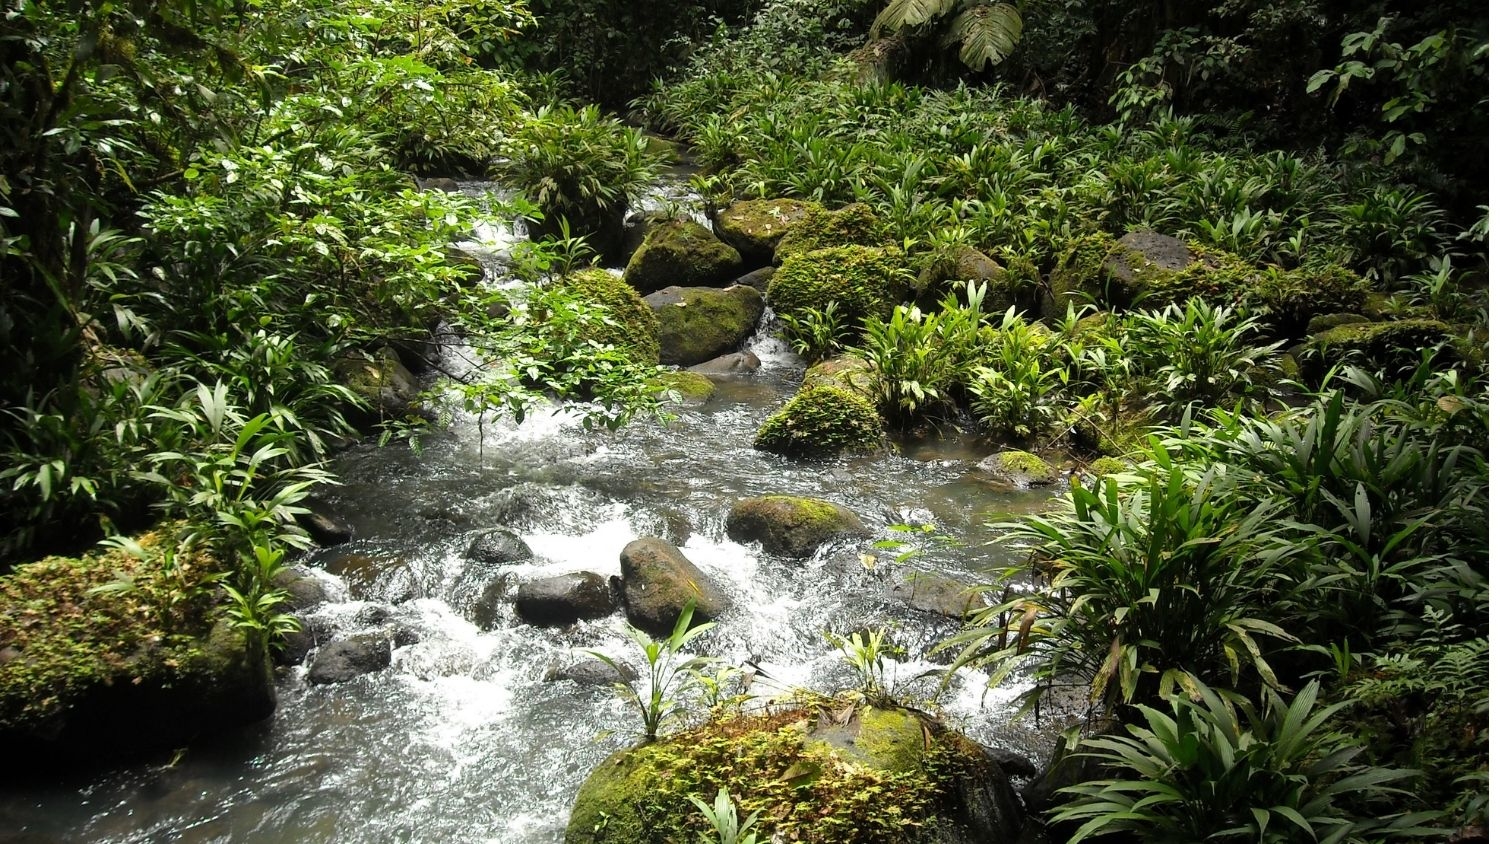 Stream in Costa Rica - Fertilizer Runoff in Streams and Rivers Can Have Cascading Effects, Analysis shows - Forestry and Environmental Resources NC State University